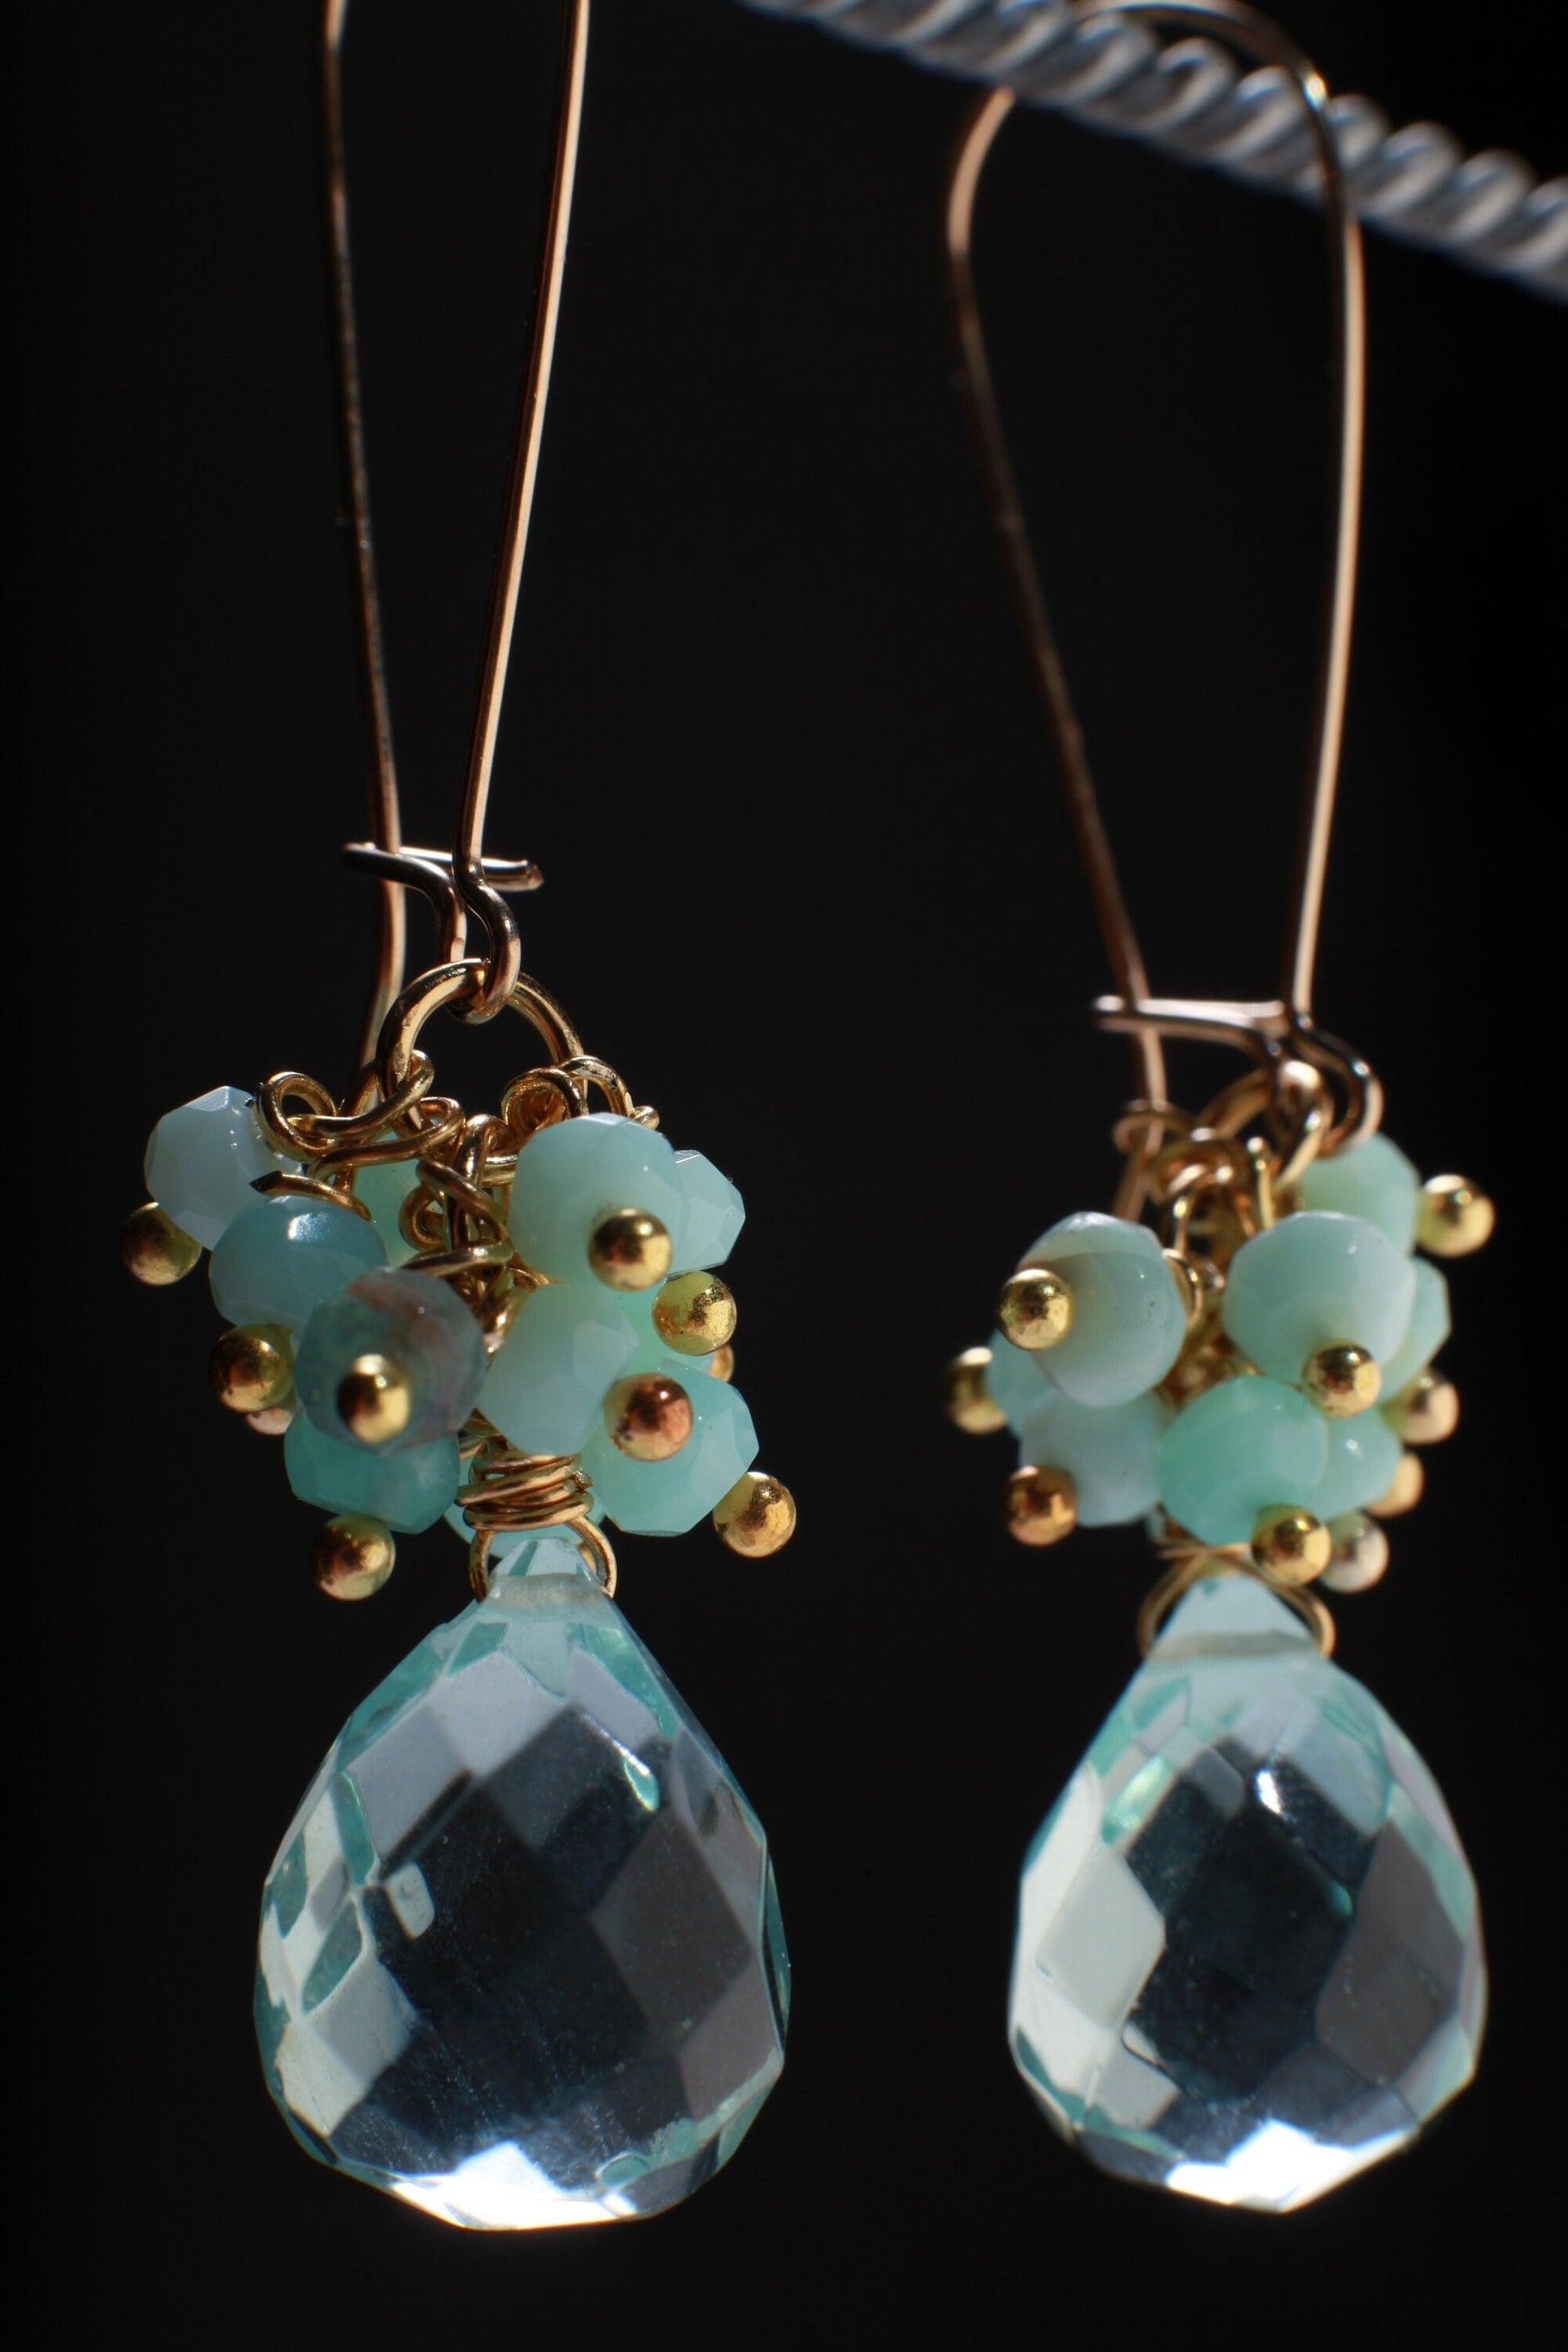 Natural Peruvian blue Opal Cluster Earring with Aqua Quartz Briolette in 14K Gold Filled Kidney Ear Wire, Soothing Gem, Boho, Beach Earring